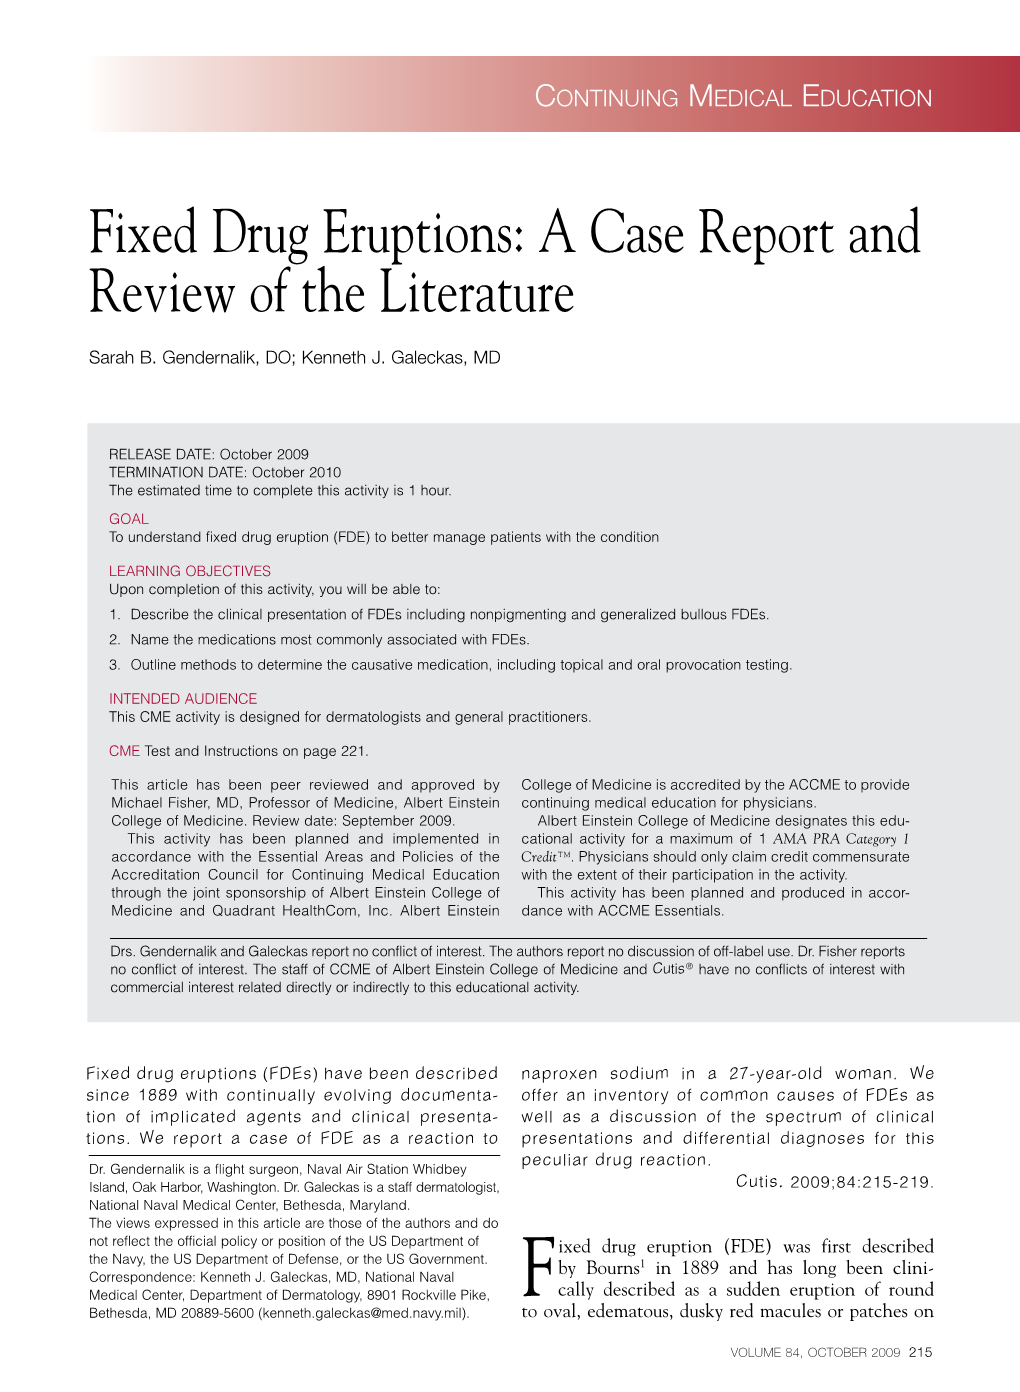 Fixed Drug Eruptions: a Case Report and Review of the Literature